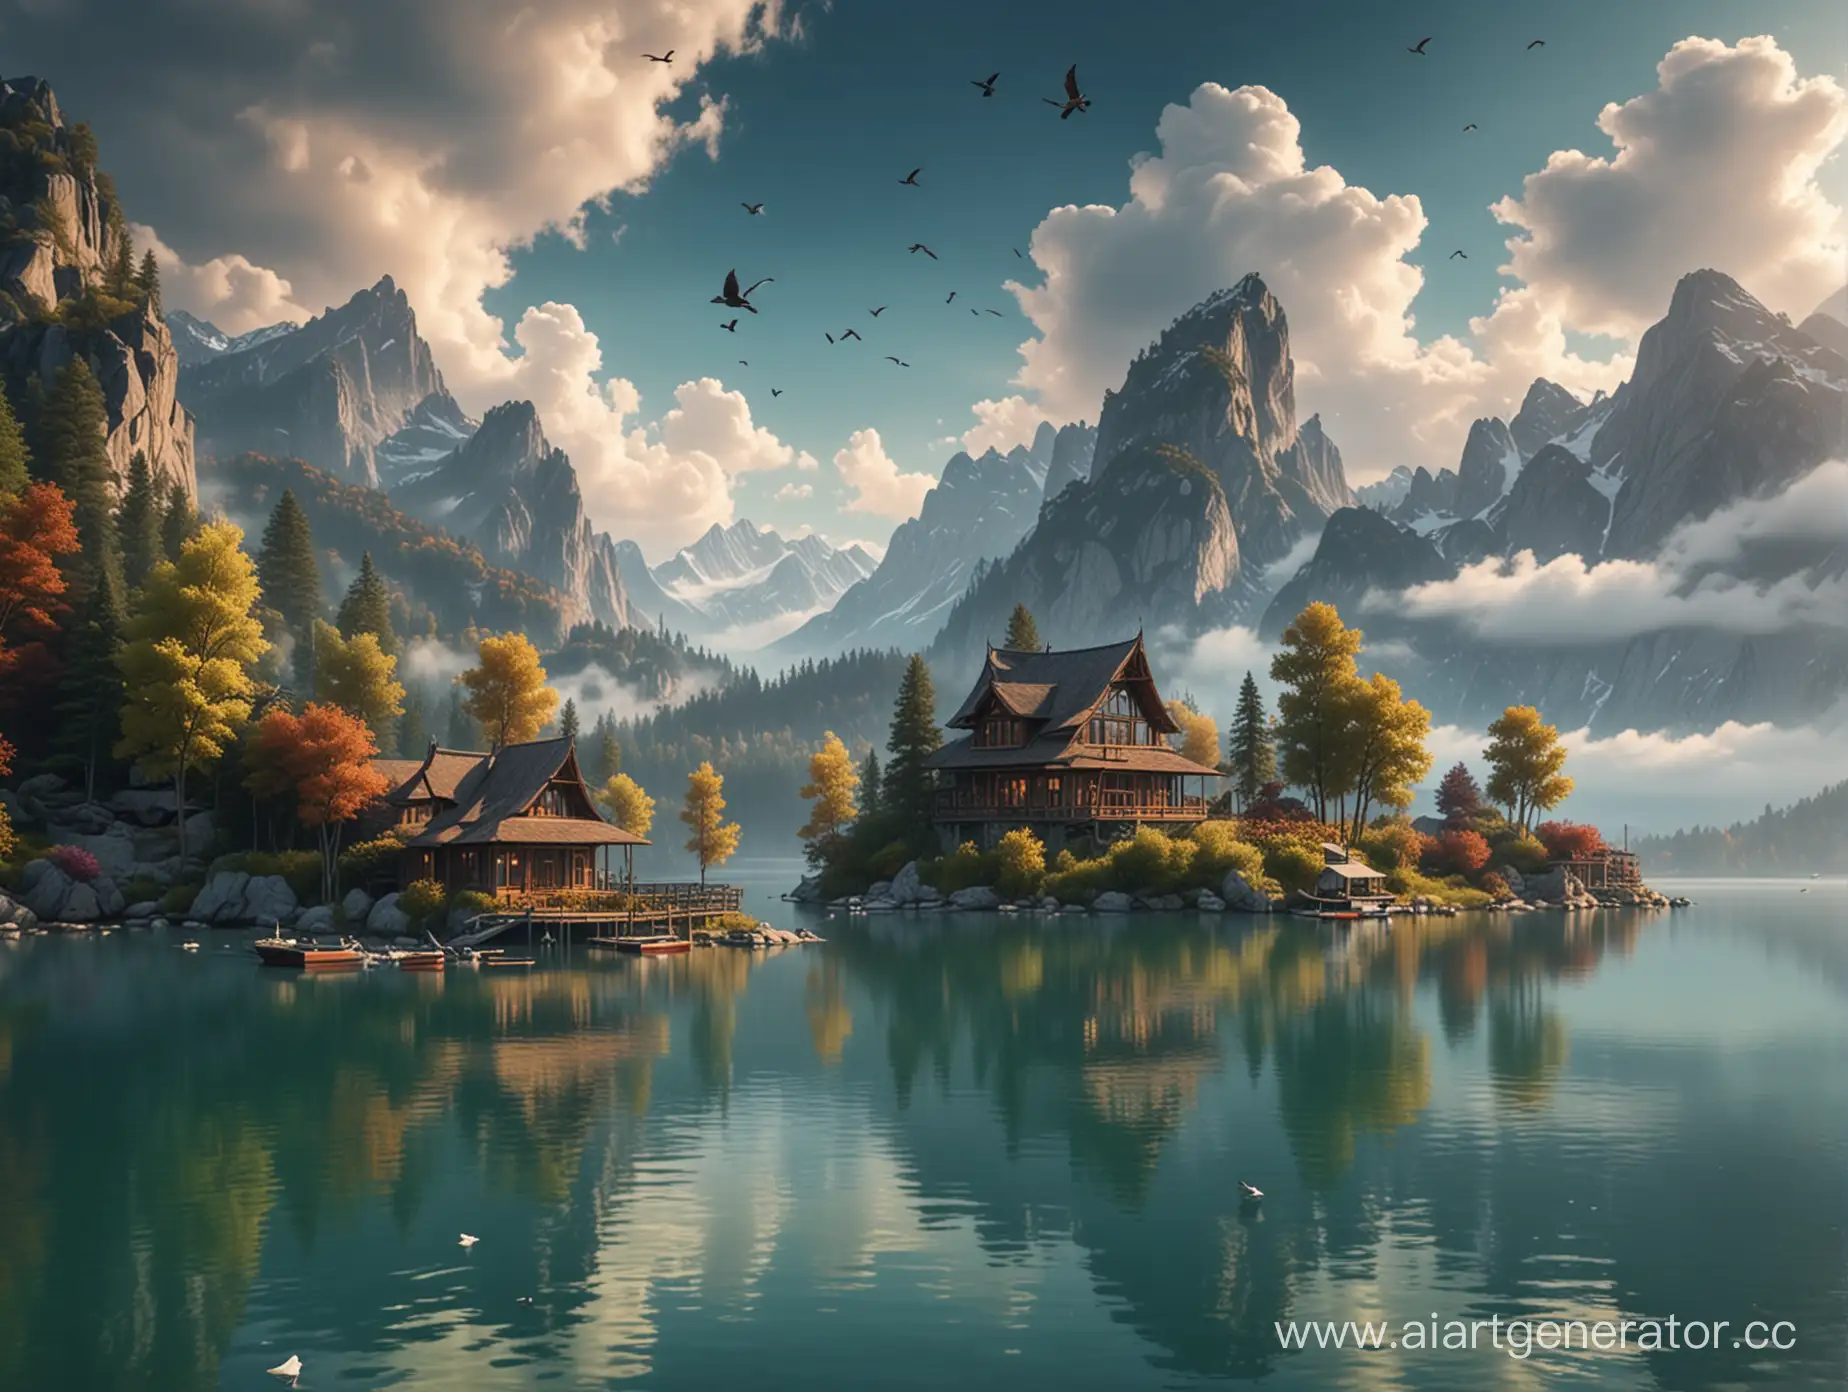 Majestic-Eastern-Style-House-Nestled-Amidst-CloudKissed-Mountains-and-Serene-Lake-with-Yacht-and-Flock-of-Birds-4K-Magic-Romance